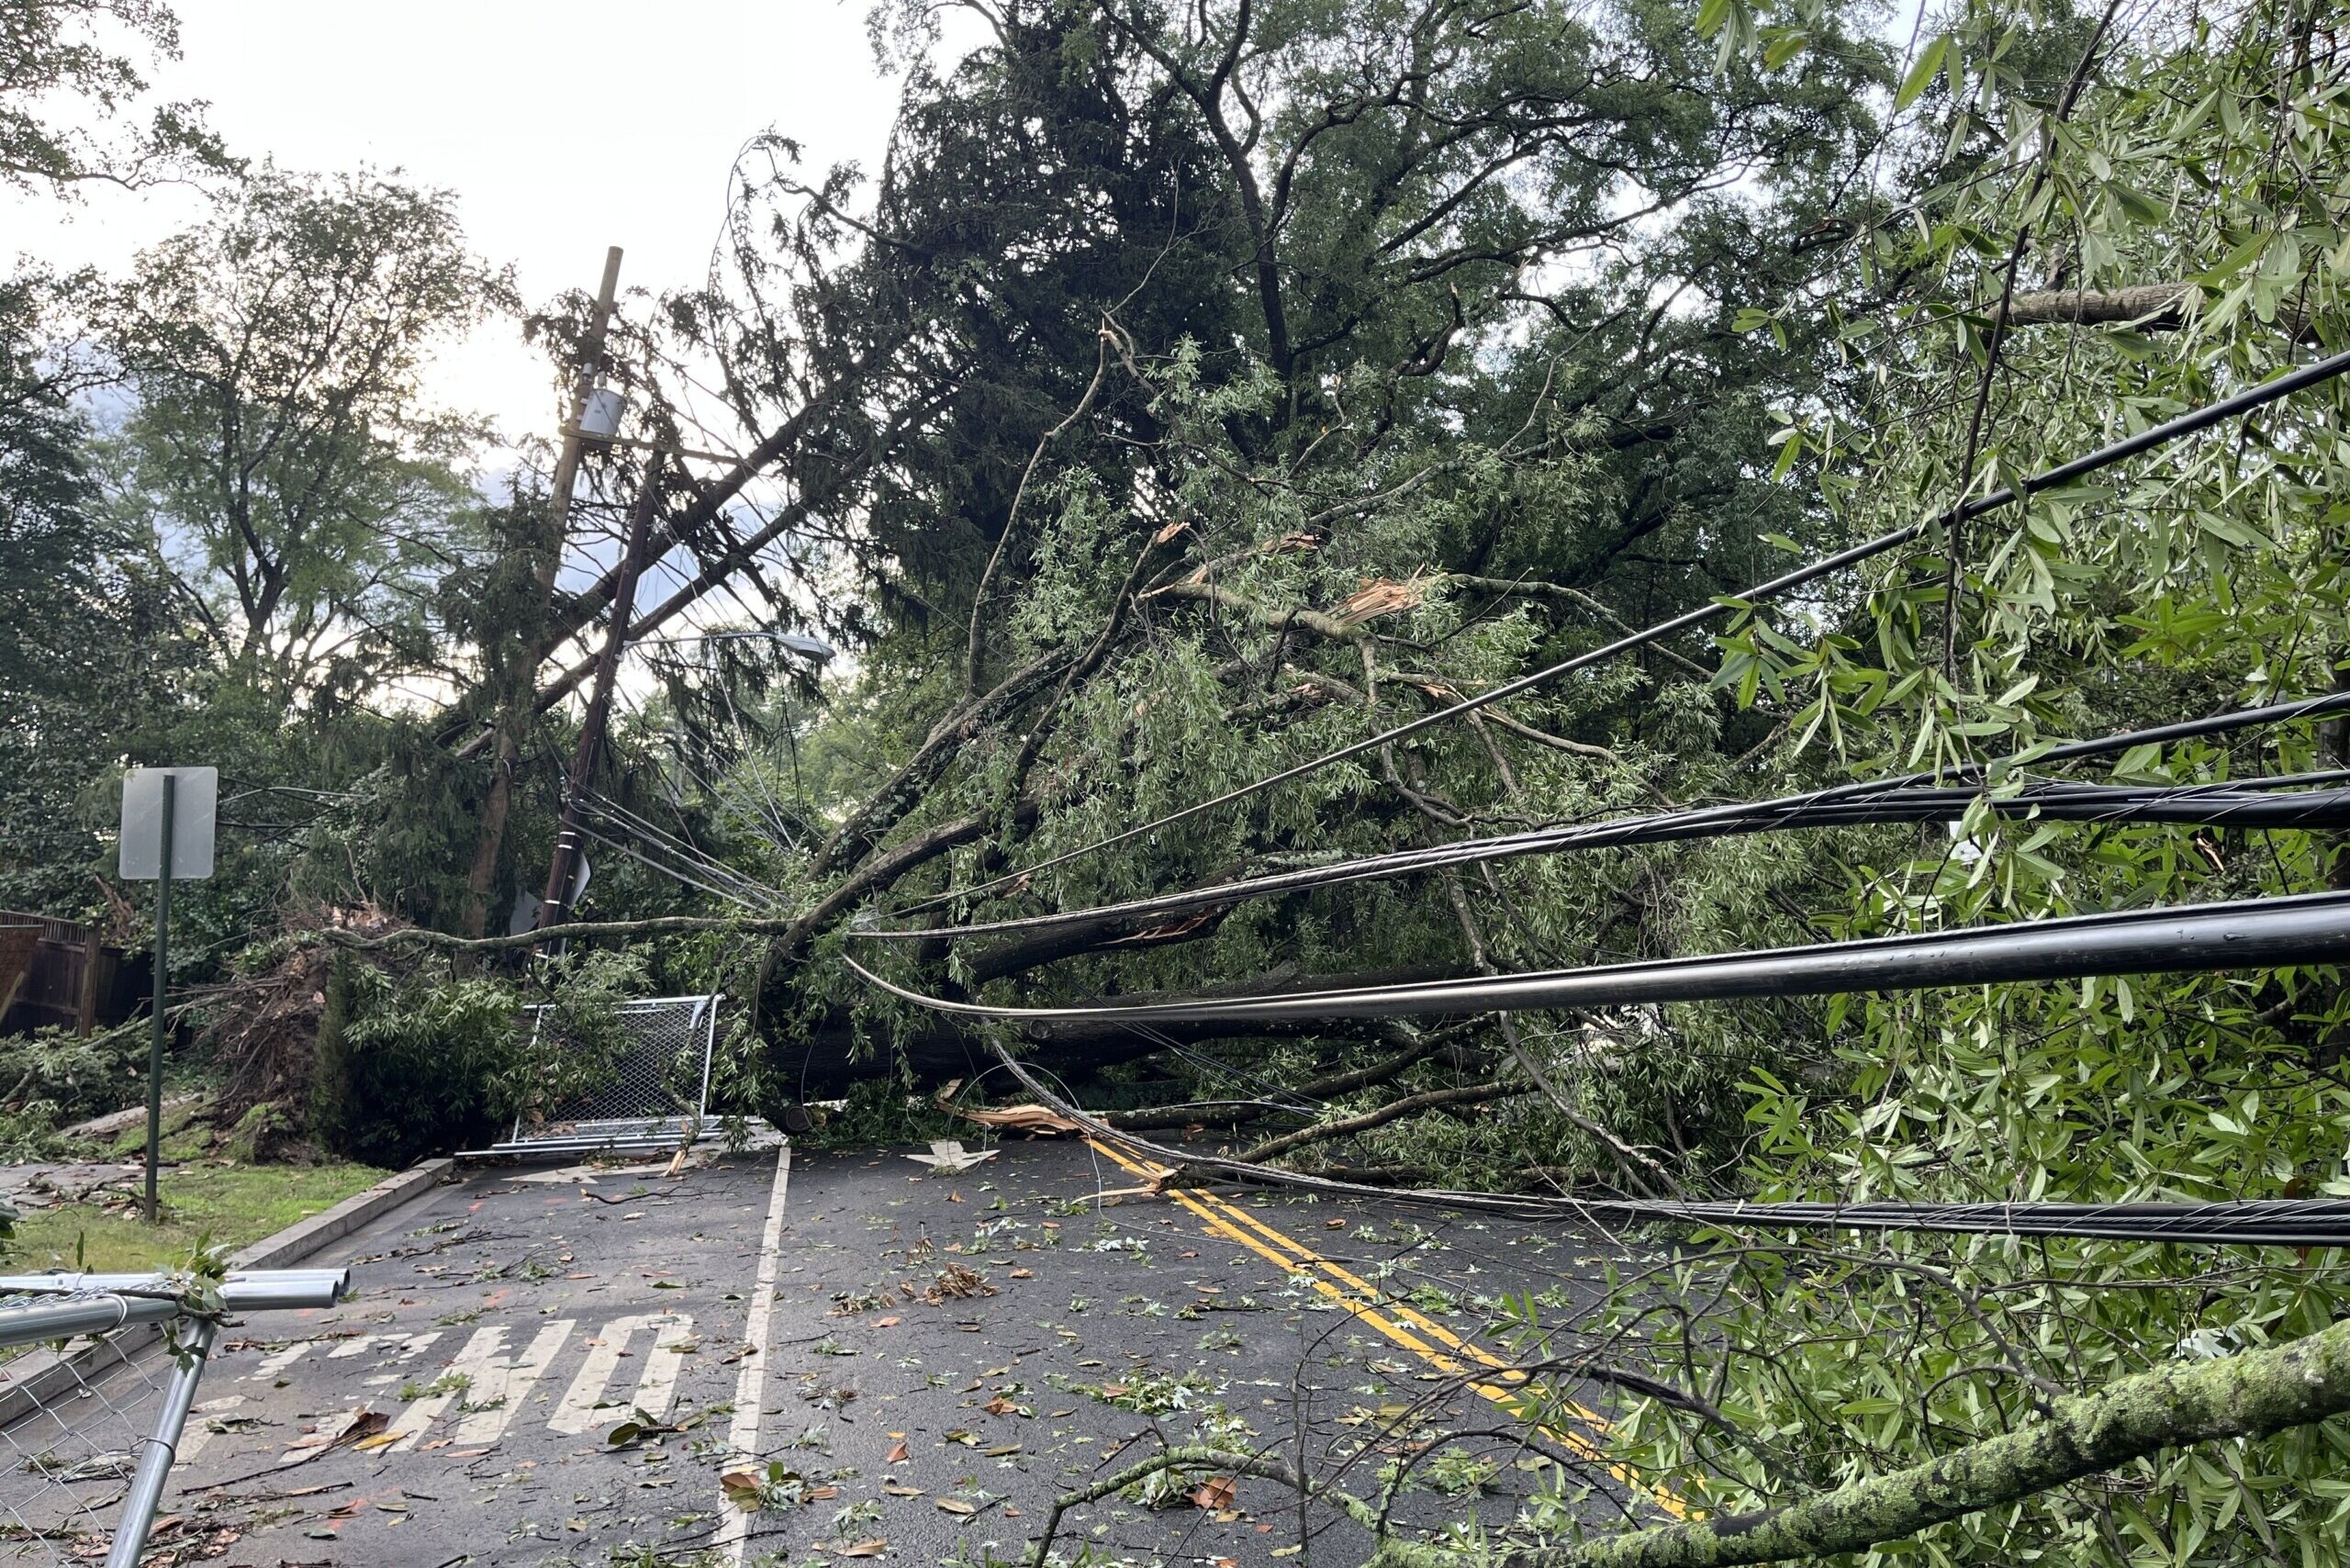 Severe weather knocks down trees, shuts off power for thousands; potentially behind death in Prince William Co.